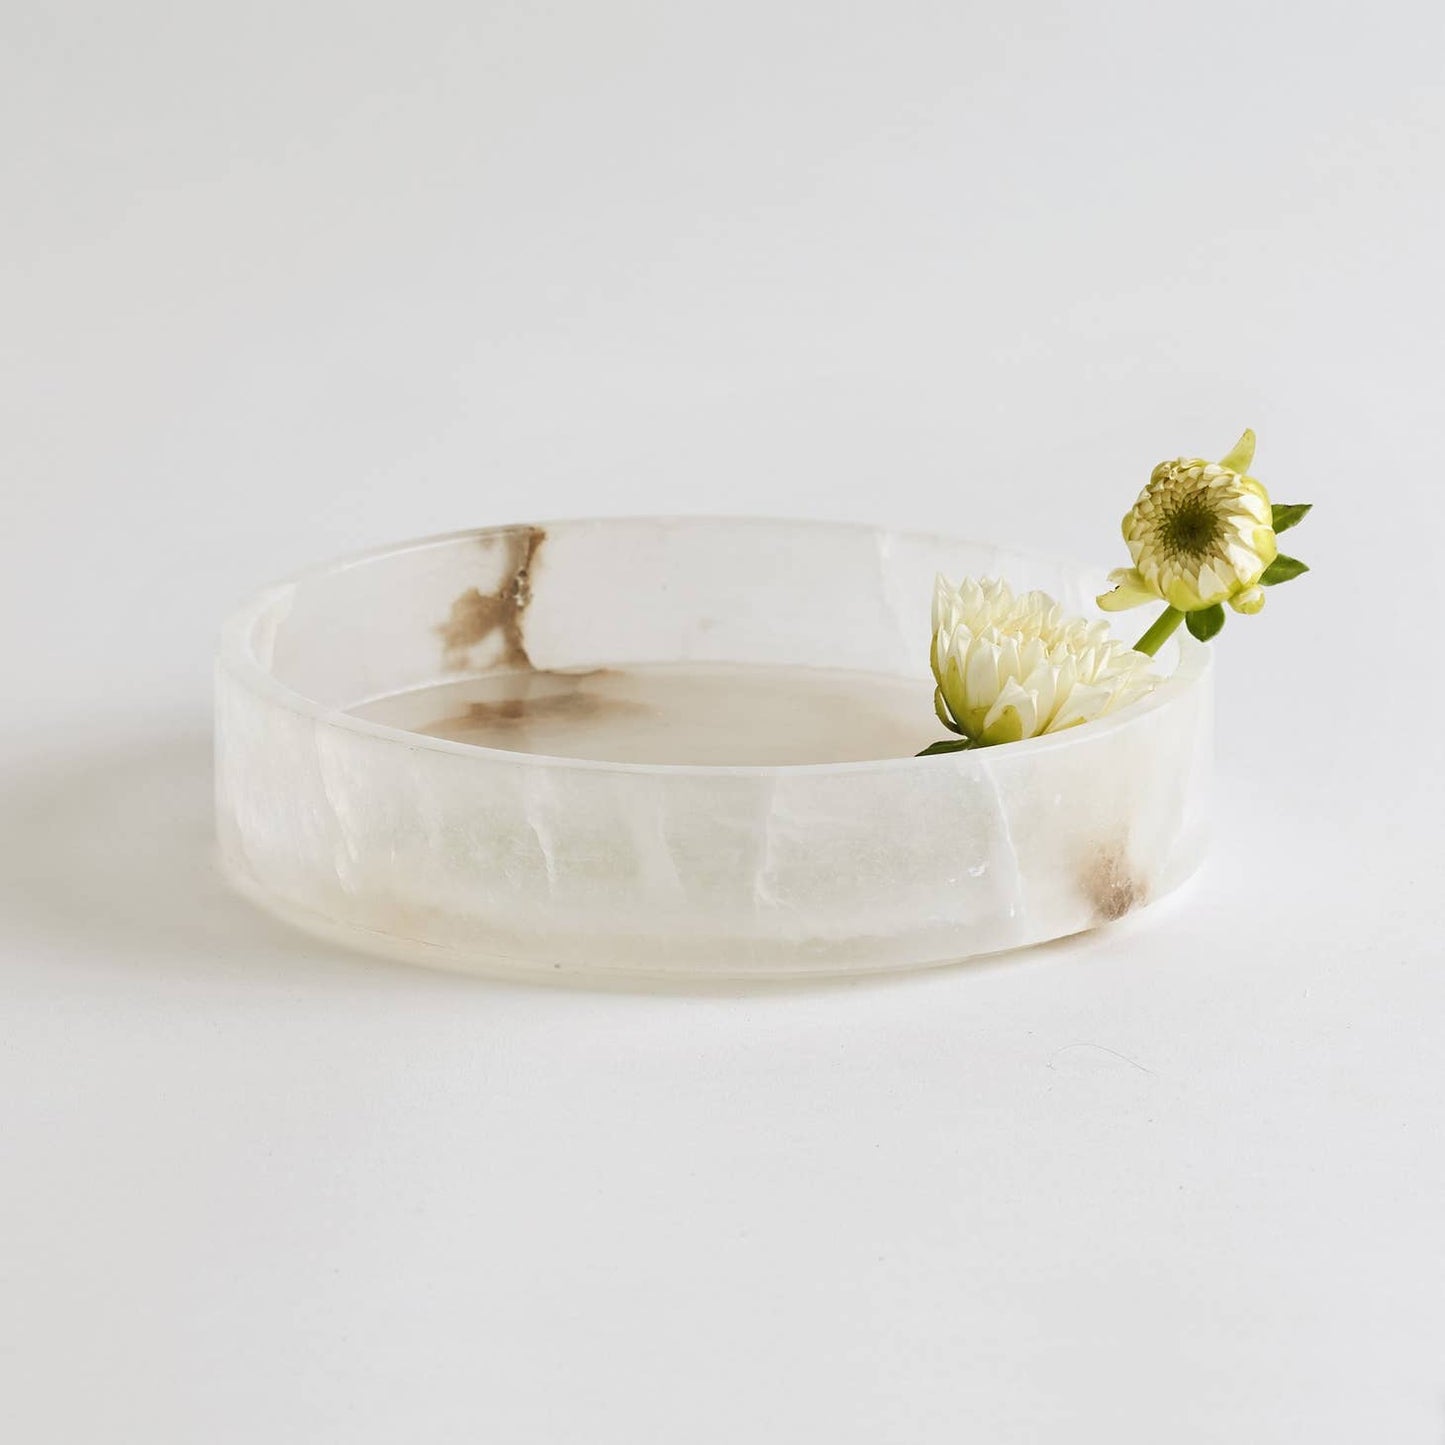 Handcrafted from fine Portuguese alabaster, this chic round tray will add a spa feel to your bath or bedroom.  A hand-polished finish accentuates natural color variations in the stone, making each tray unique. A stable, footed base and vertical rim safely contain & stylishly display its contents.